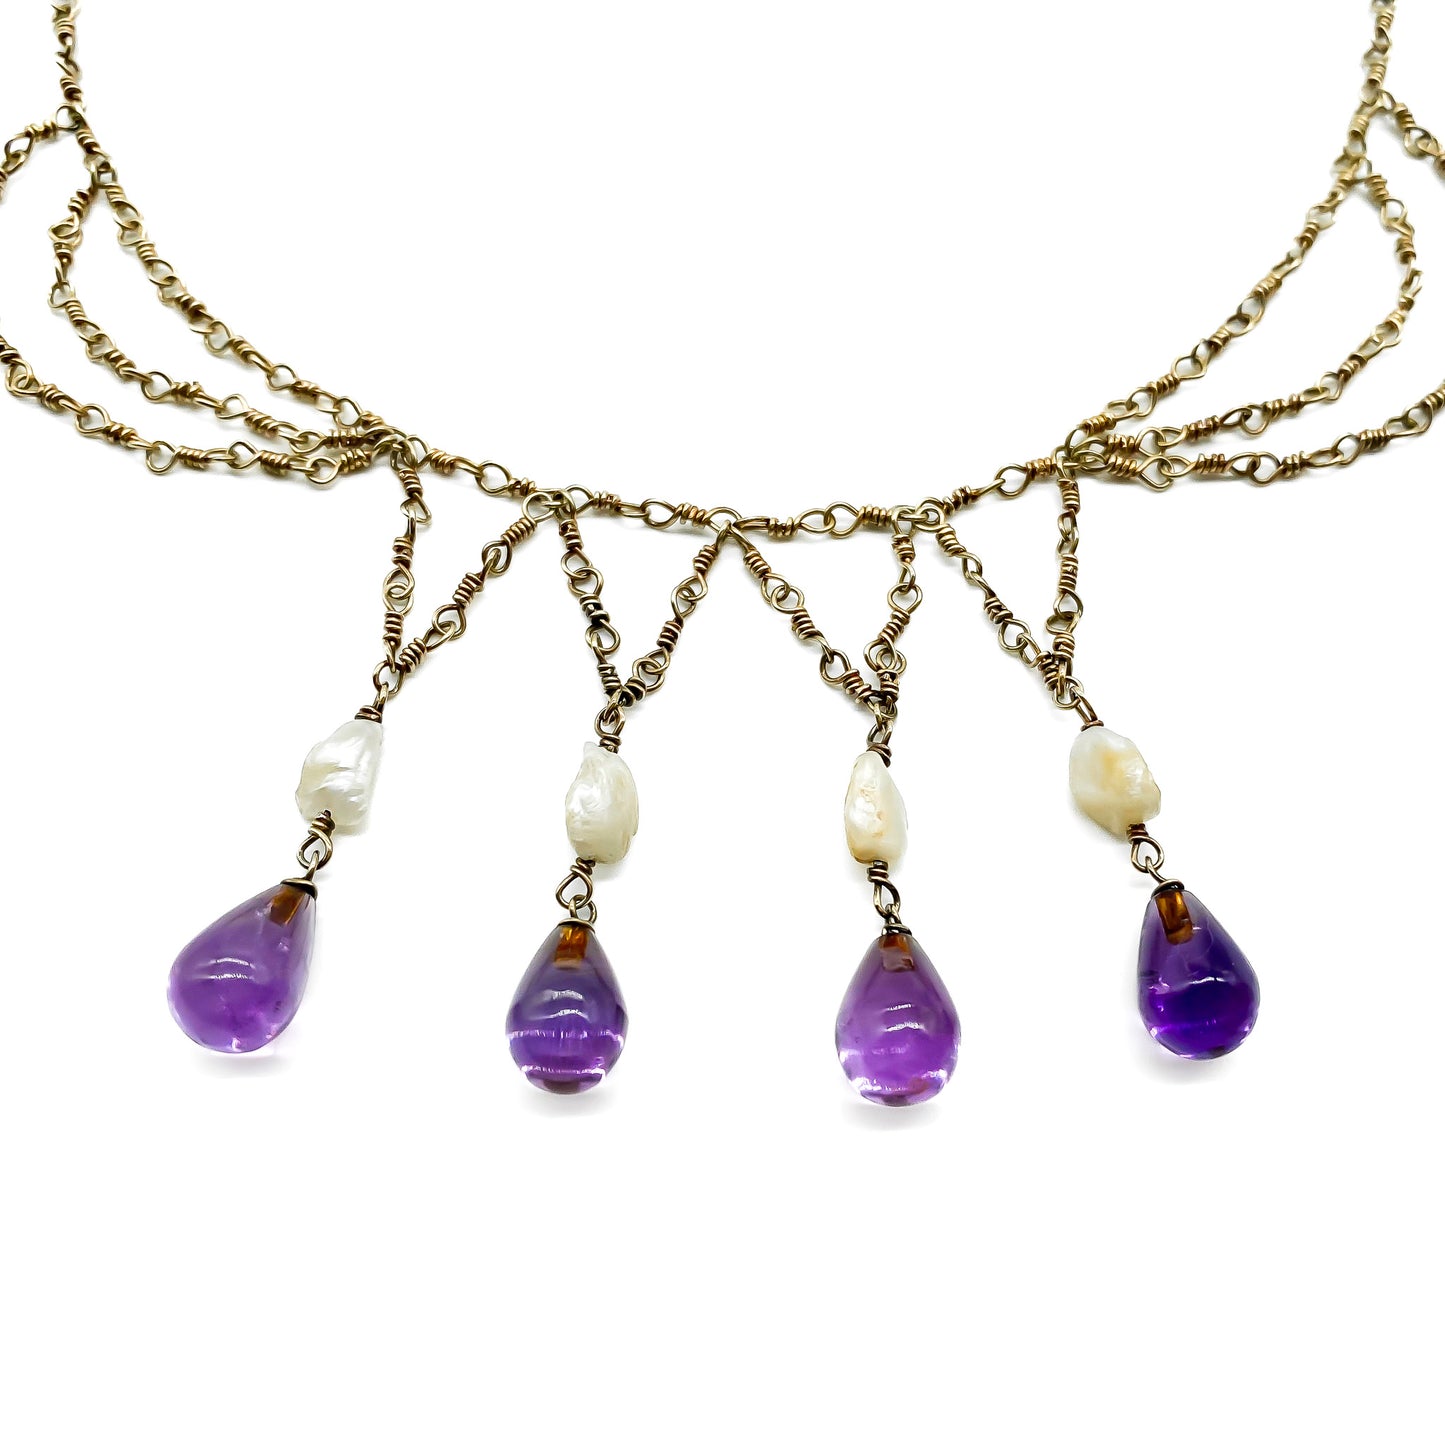 Lovely Edwardian silver gilt filigree festoon necklace with four pearl and amethyst drops.